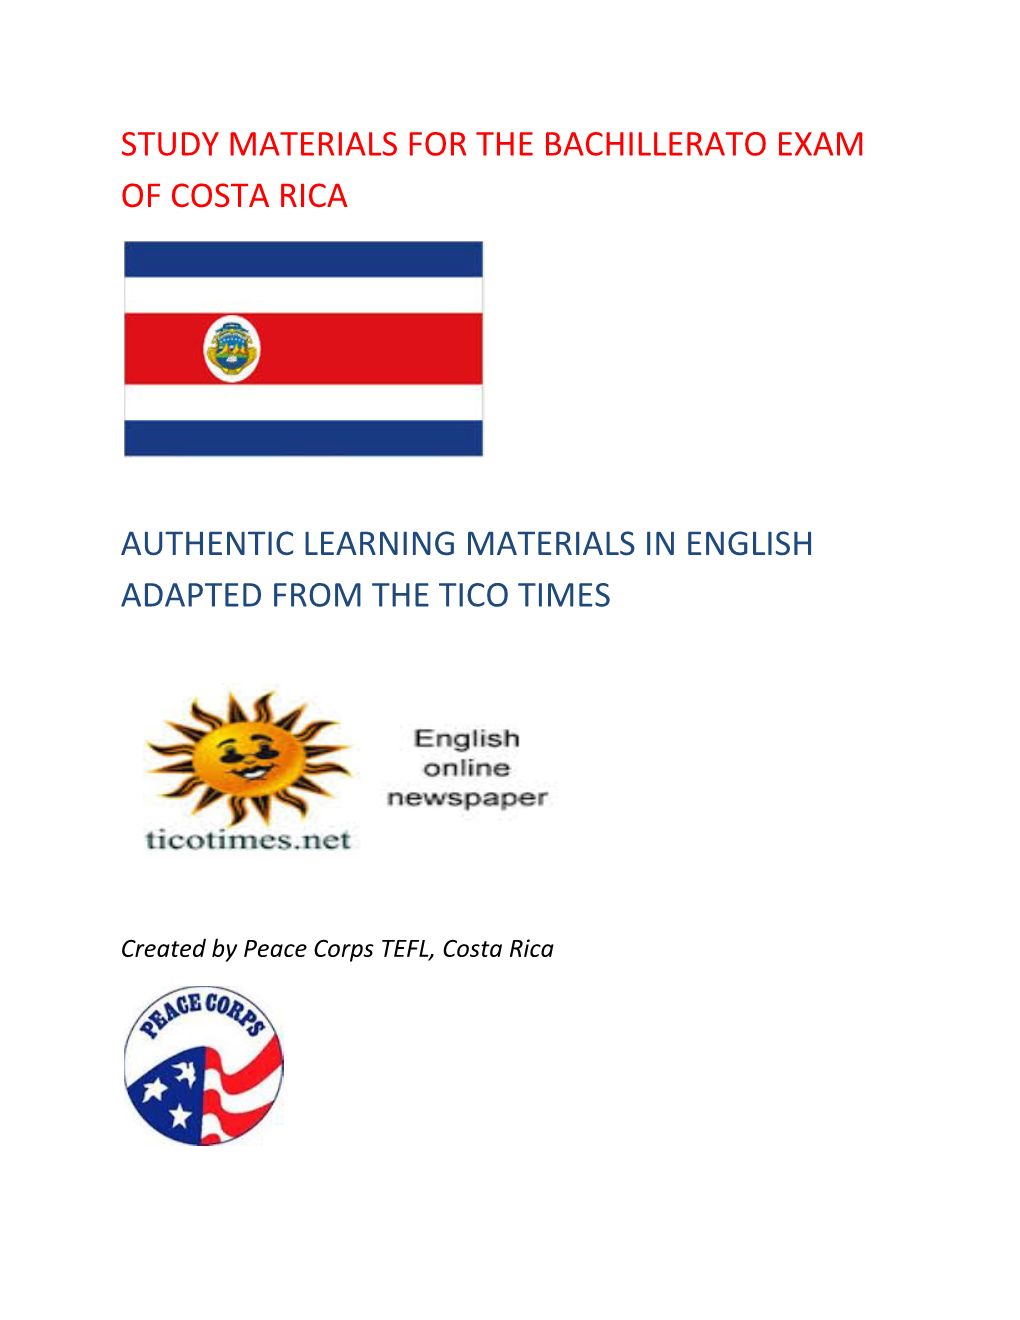 Study Materials for the Bachillerato Exam of Costa Rica Authentic Learning Materials in English Adapted from the Tico Times